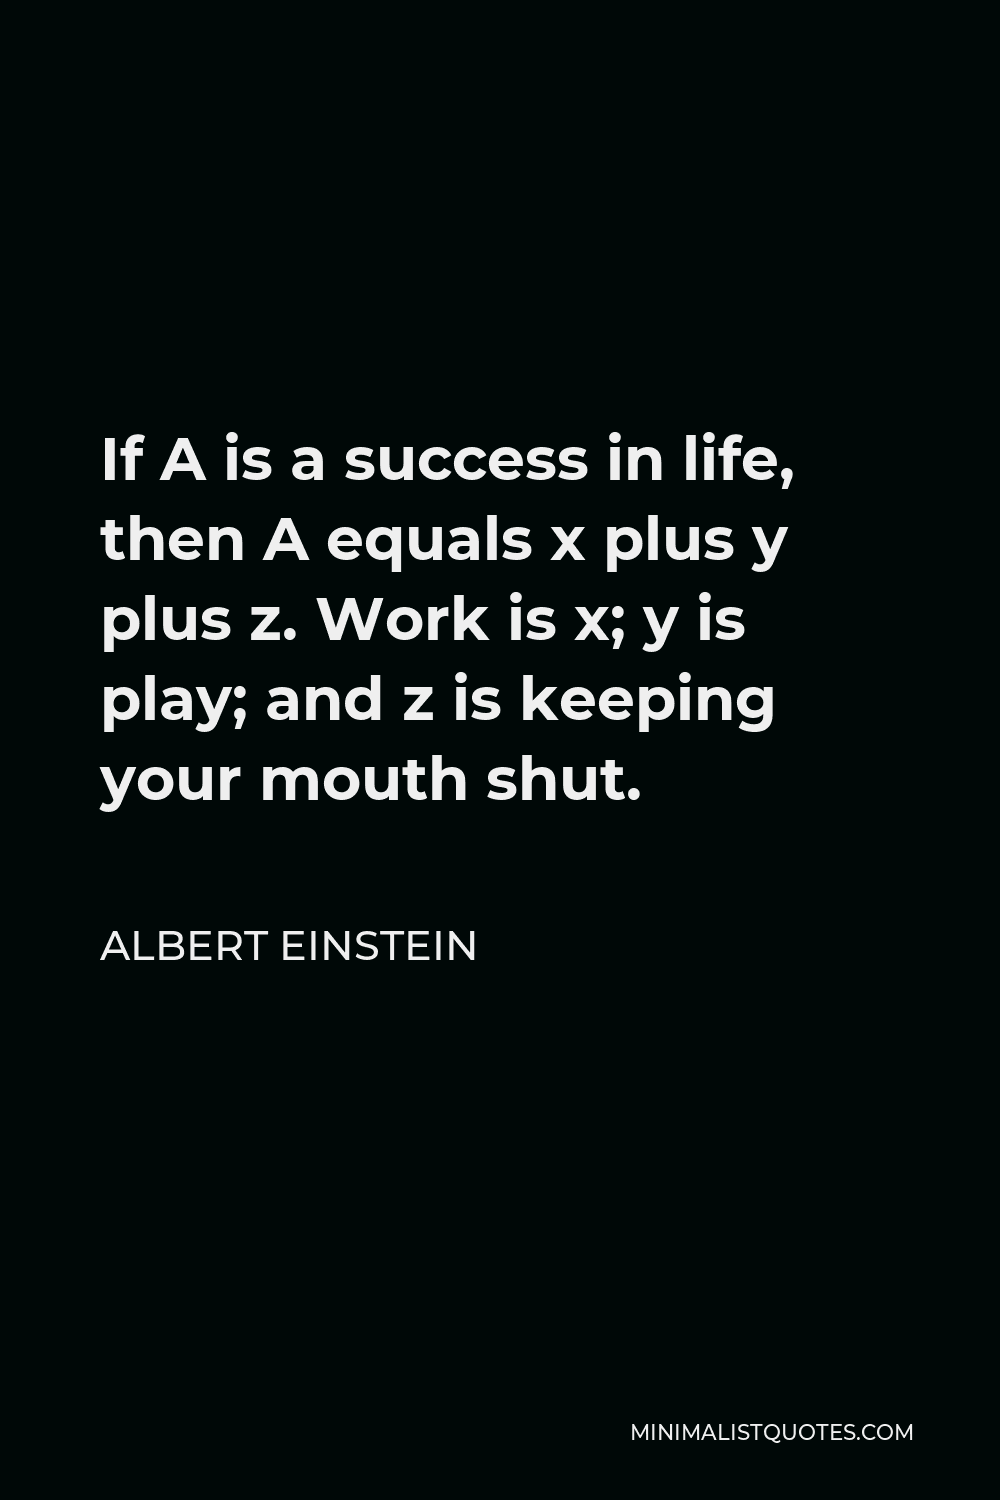 Albert Einstein Quote If A Is A Success In Life Then A Equals X Plus Y Plus Z Work Is X Y Is Play And Z Is Keeping Your Mouth Shut